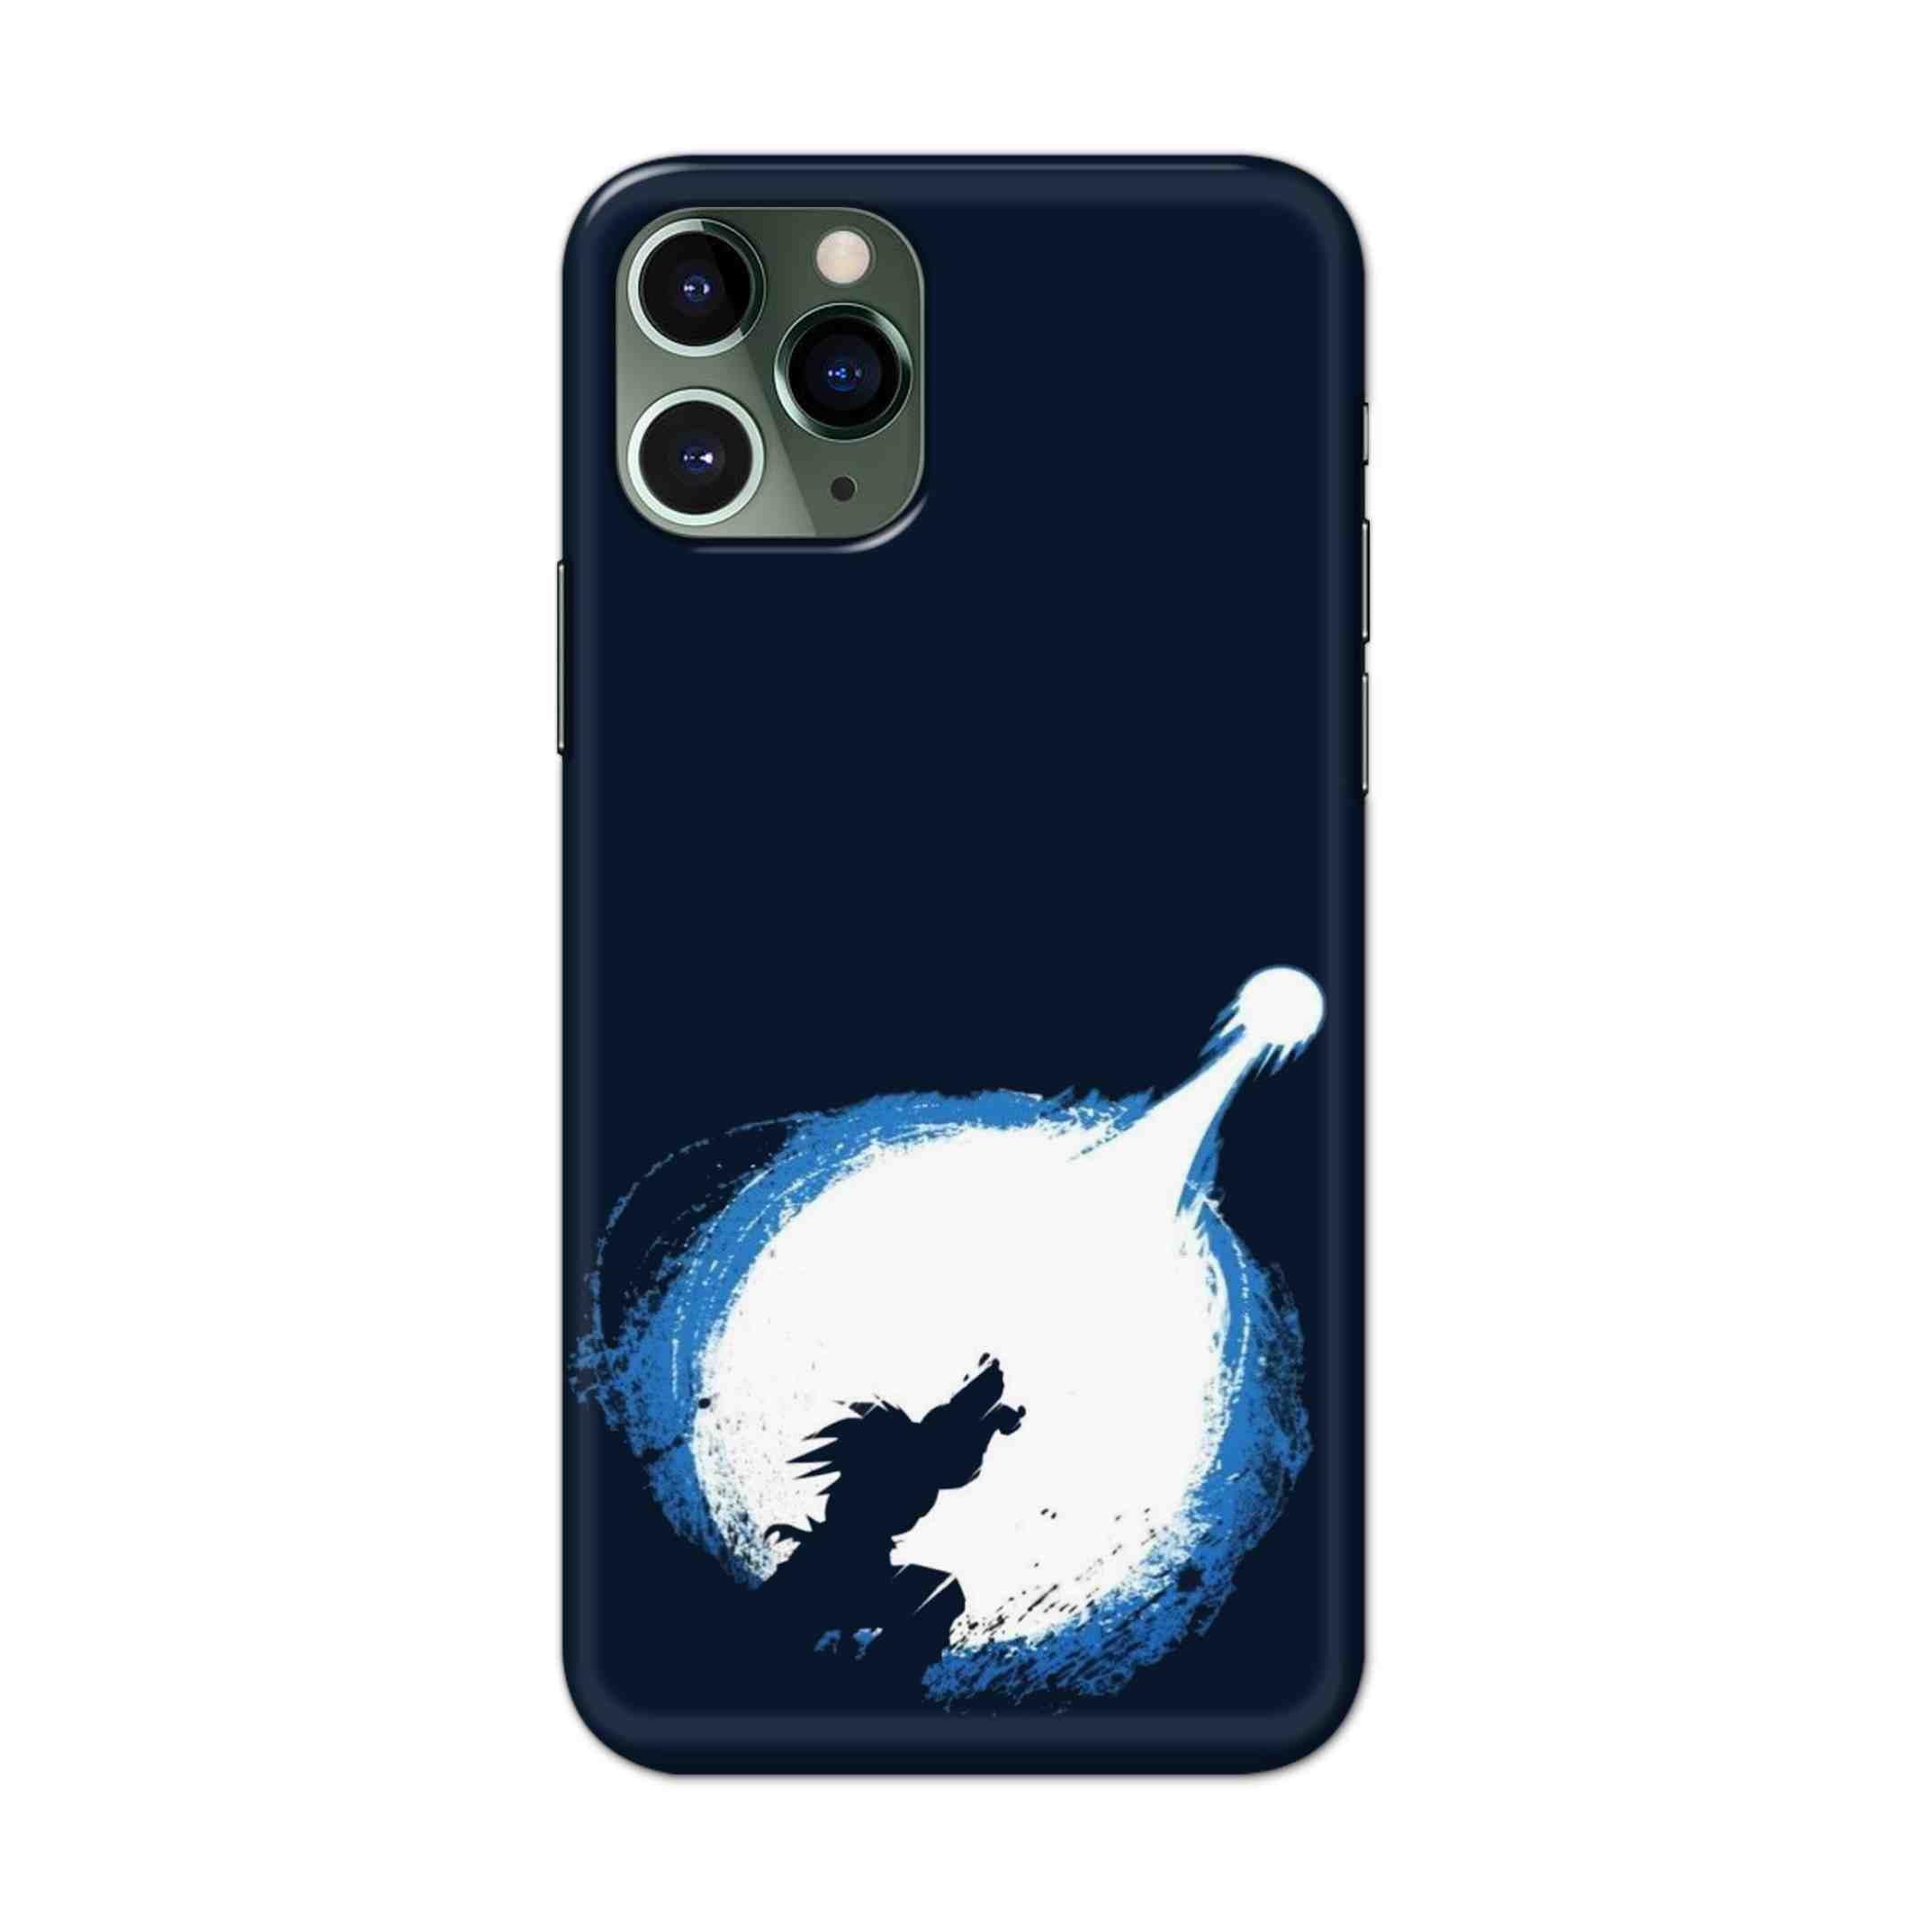 Buy Goku Power Hard Back Mobile Phone Case/Cover For iPhone 11 Pro Online